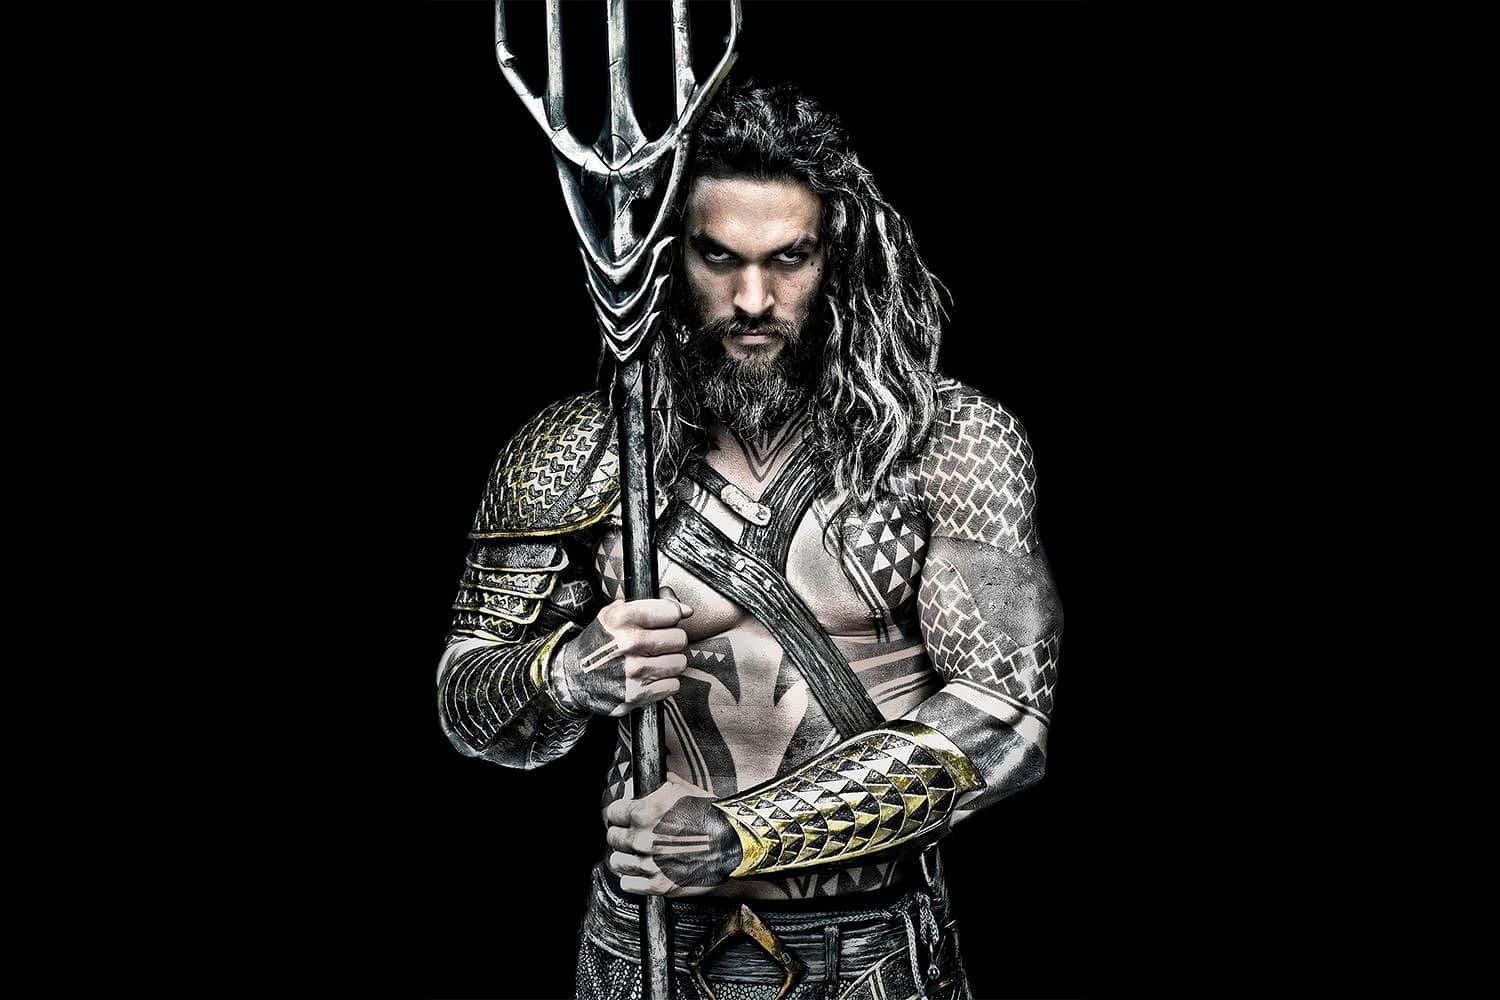 dawn-of-the-justice-league-shows-us-our-first-look-at-jason-momoa-as-aquaman-jason-momoa-800037.jpg